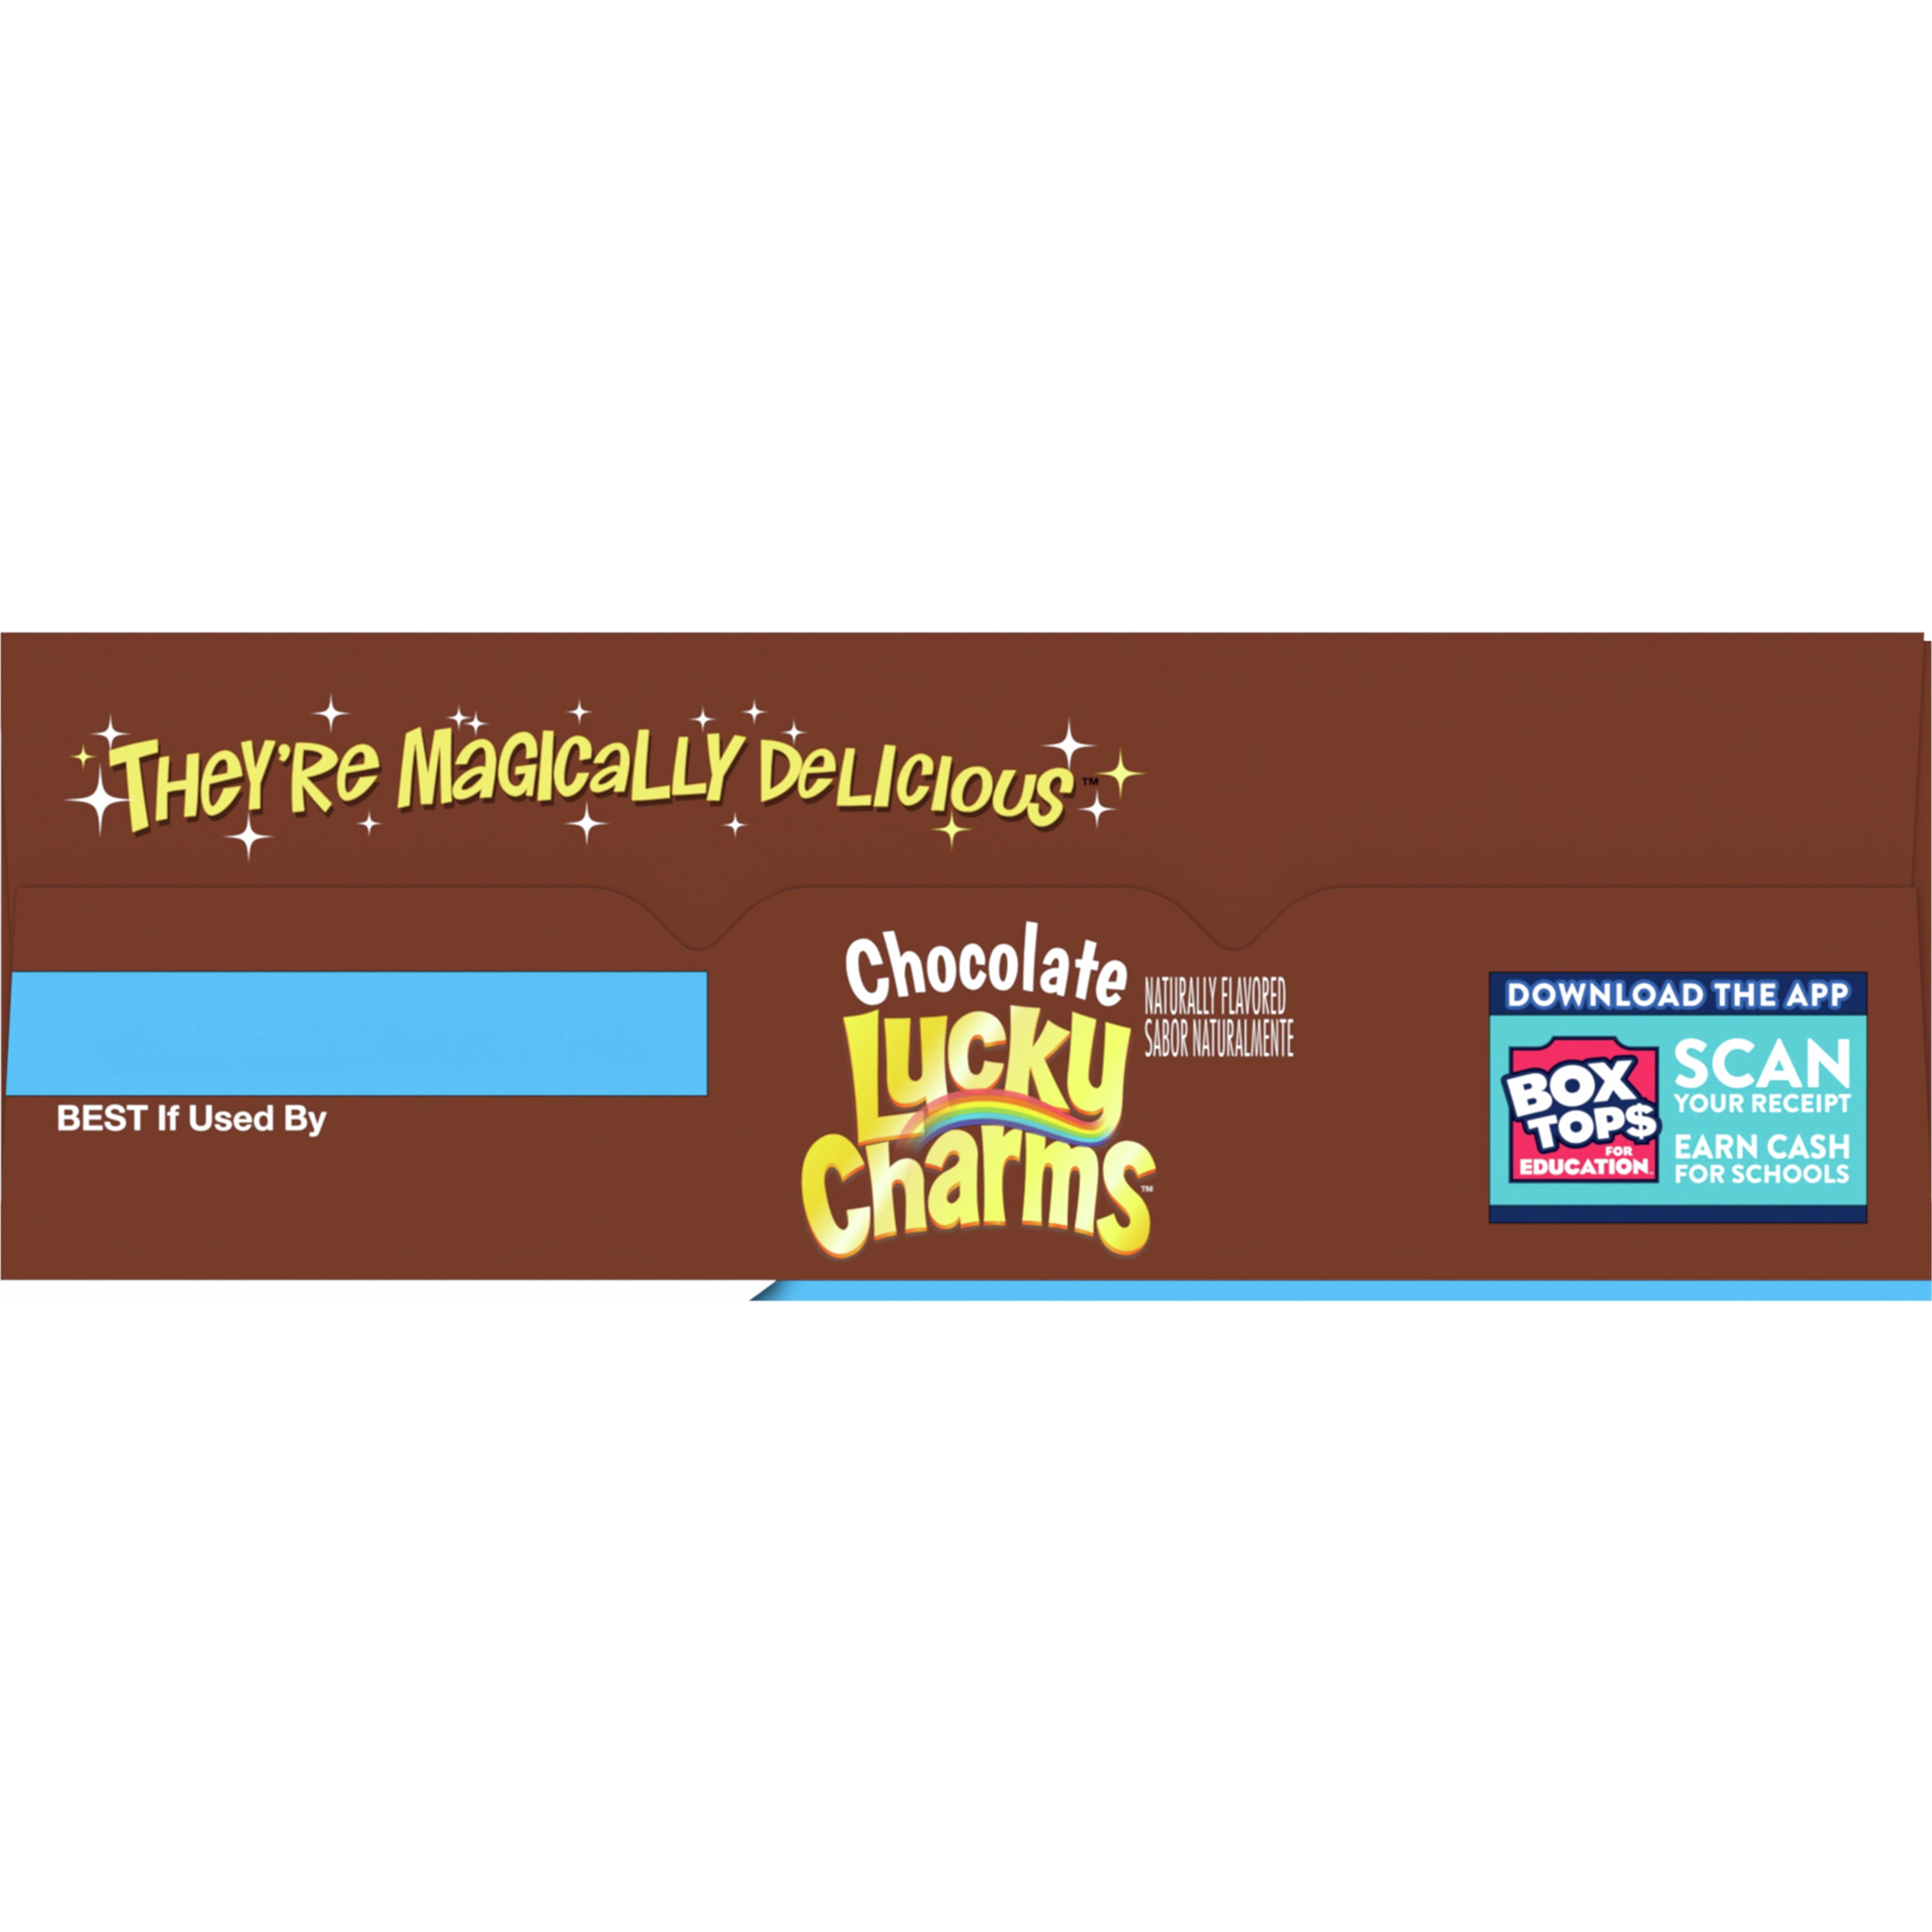 General Mills Lucky Charms Cereal de Chocolate – Mr Sabor